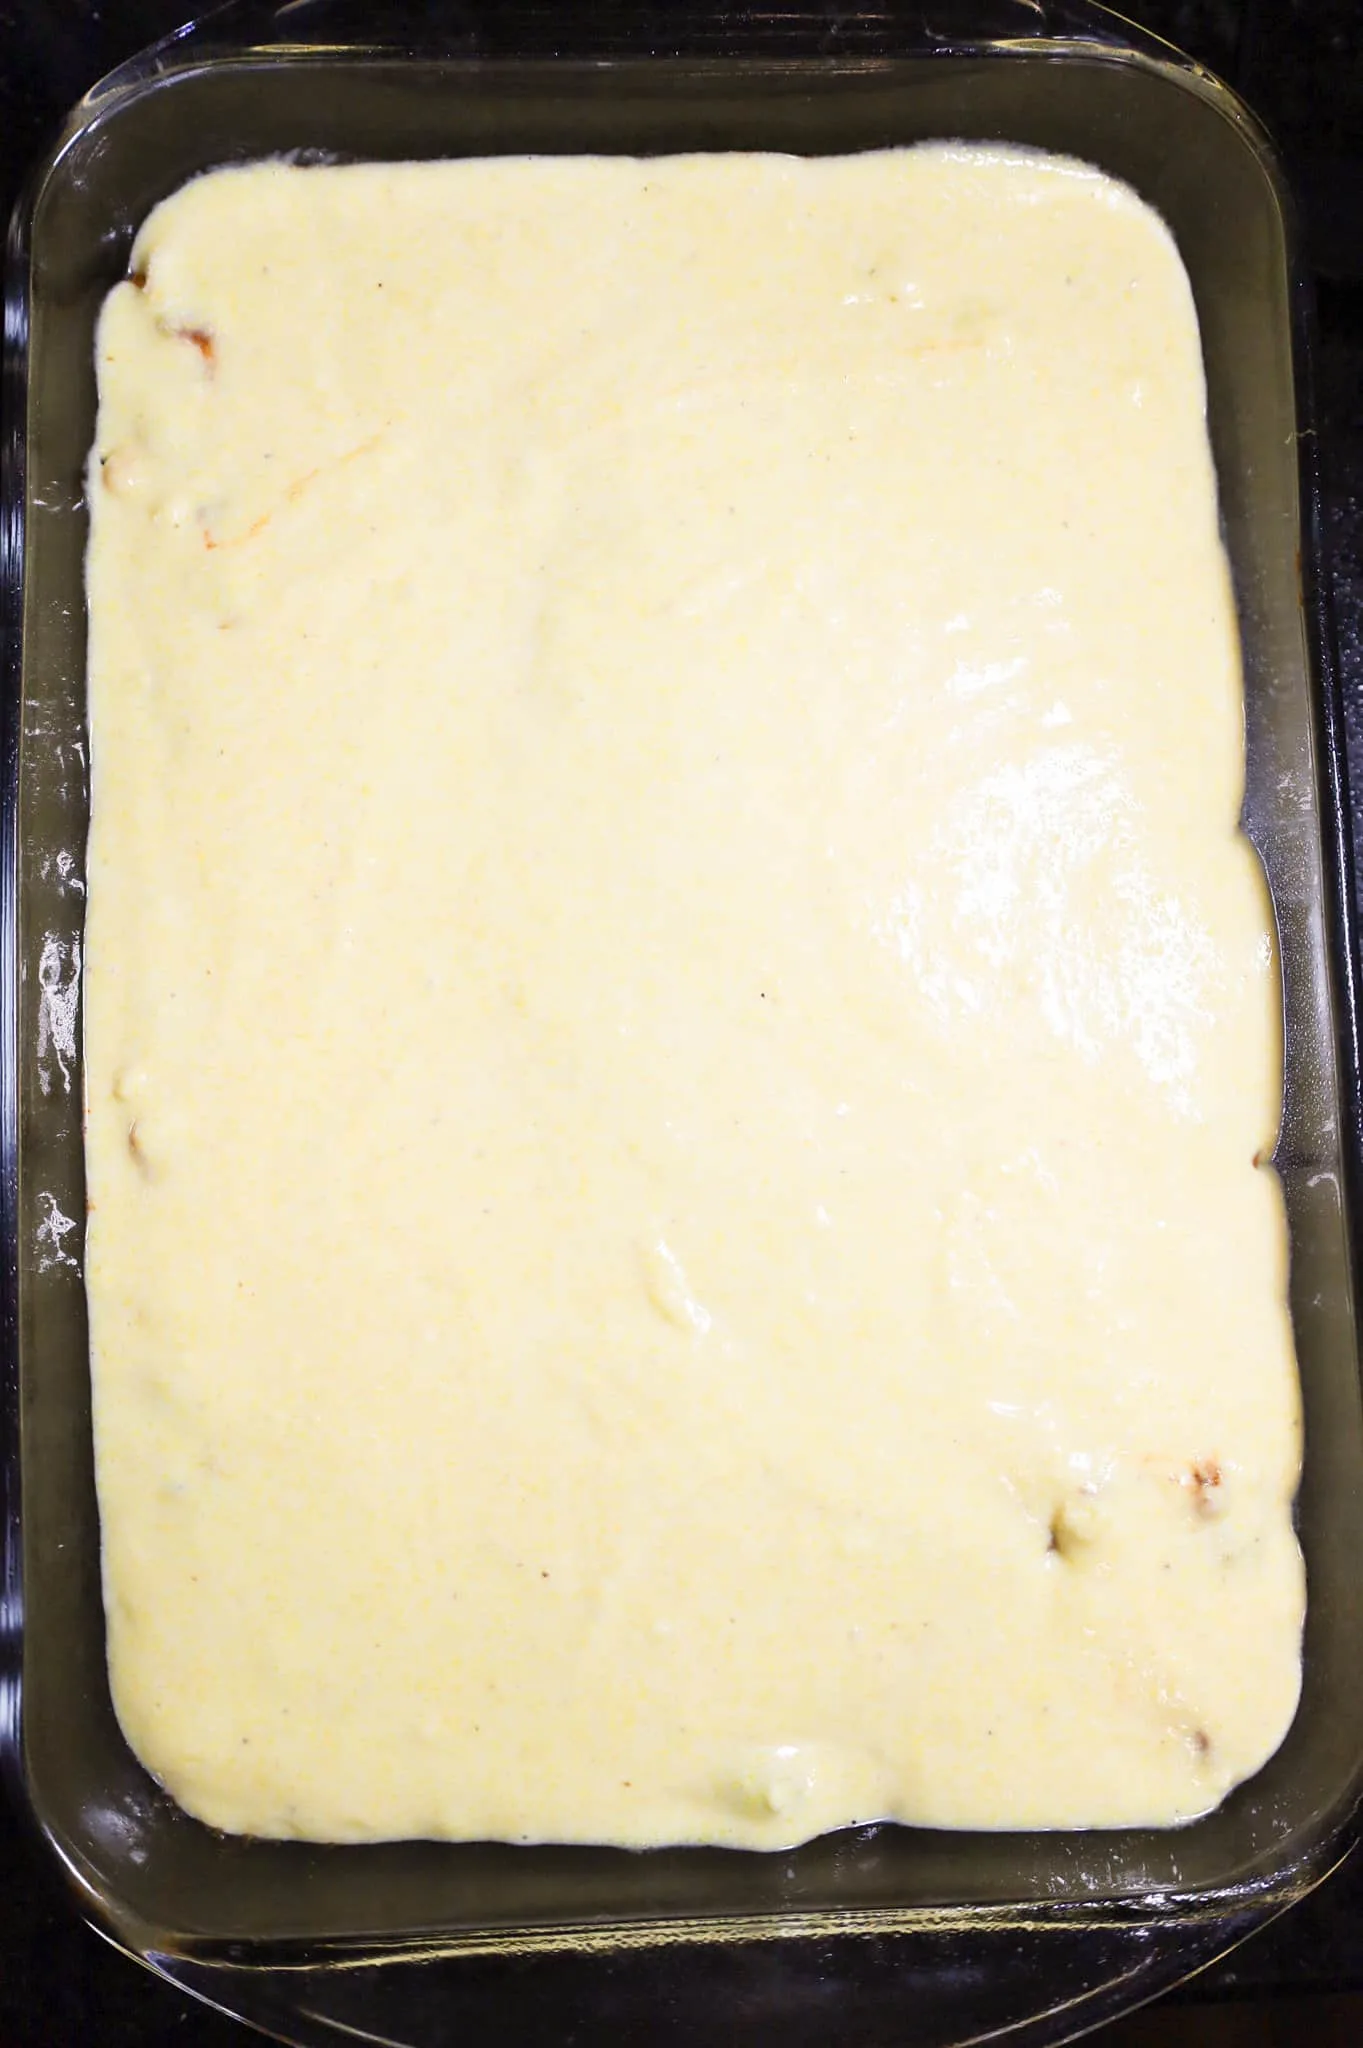 cornbread batter on top of ground beef mixture in a baking dish